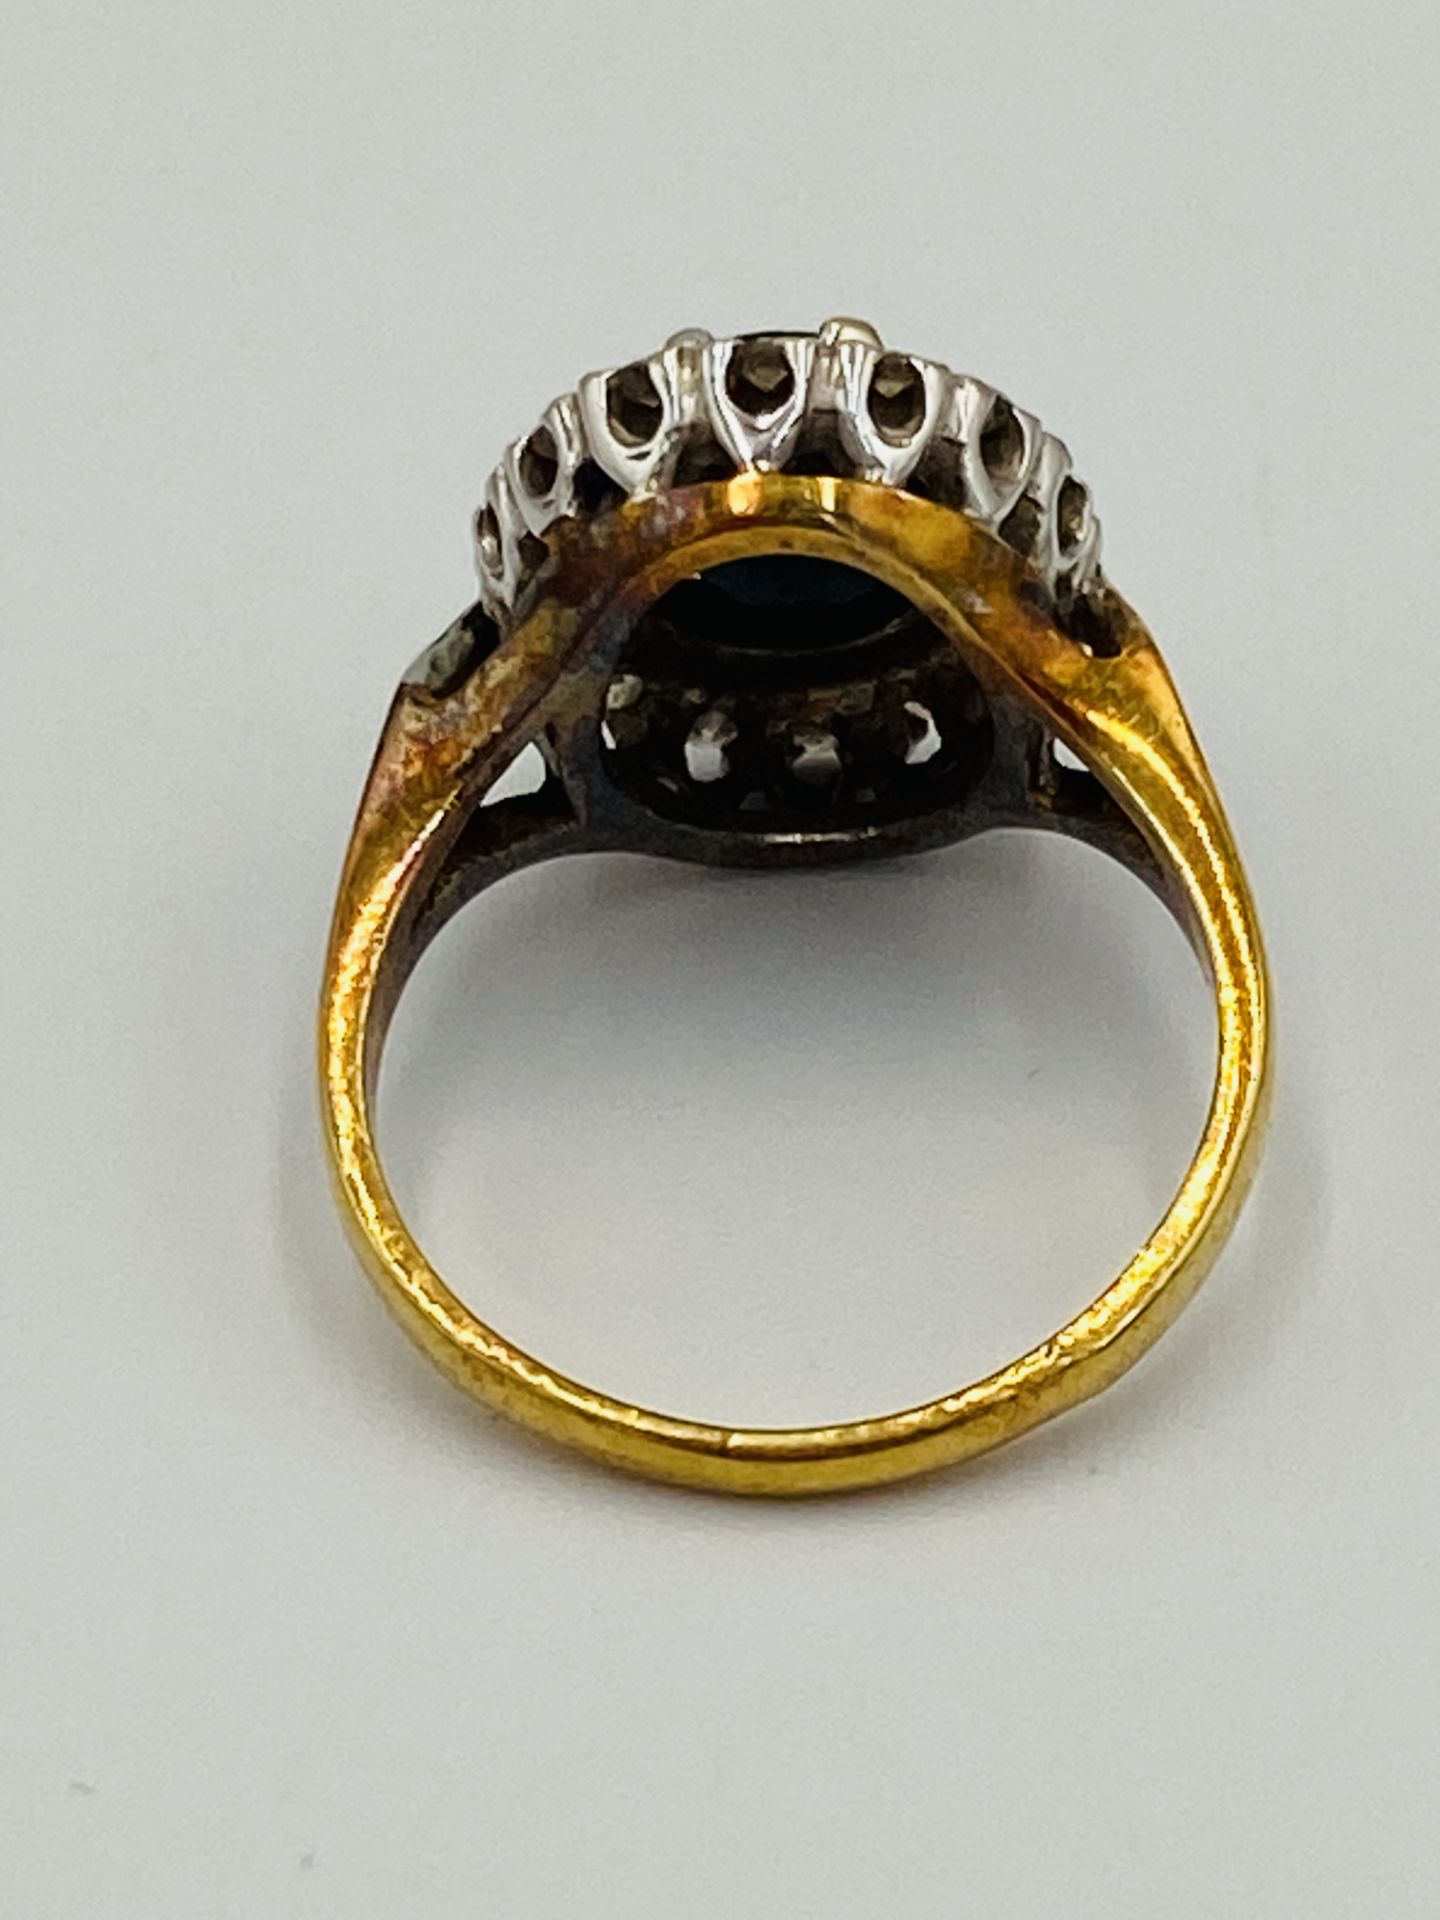 18ct gold, sapphire and diamond ring - Image 5 of 5